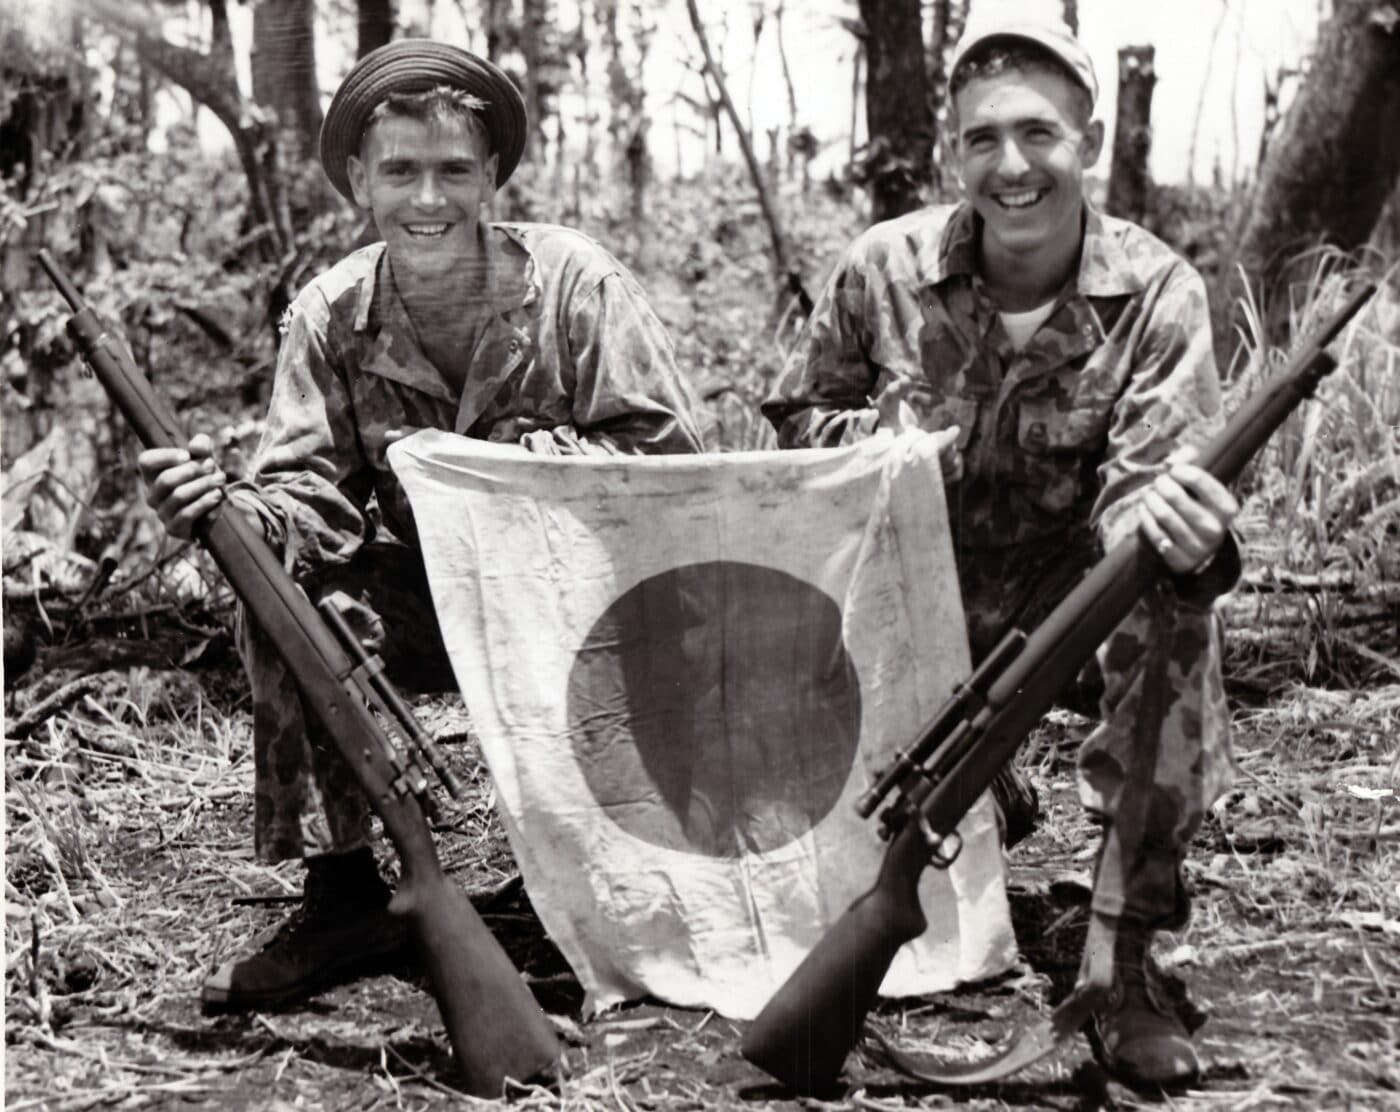 Two Marine snipers, who were former high school friends, holding Springfield 03A4 rifles